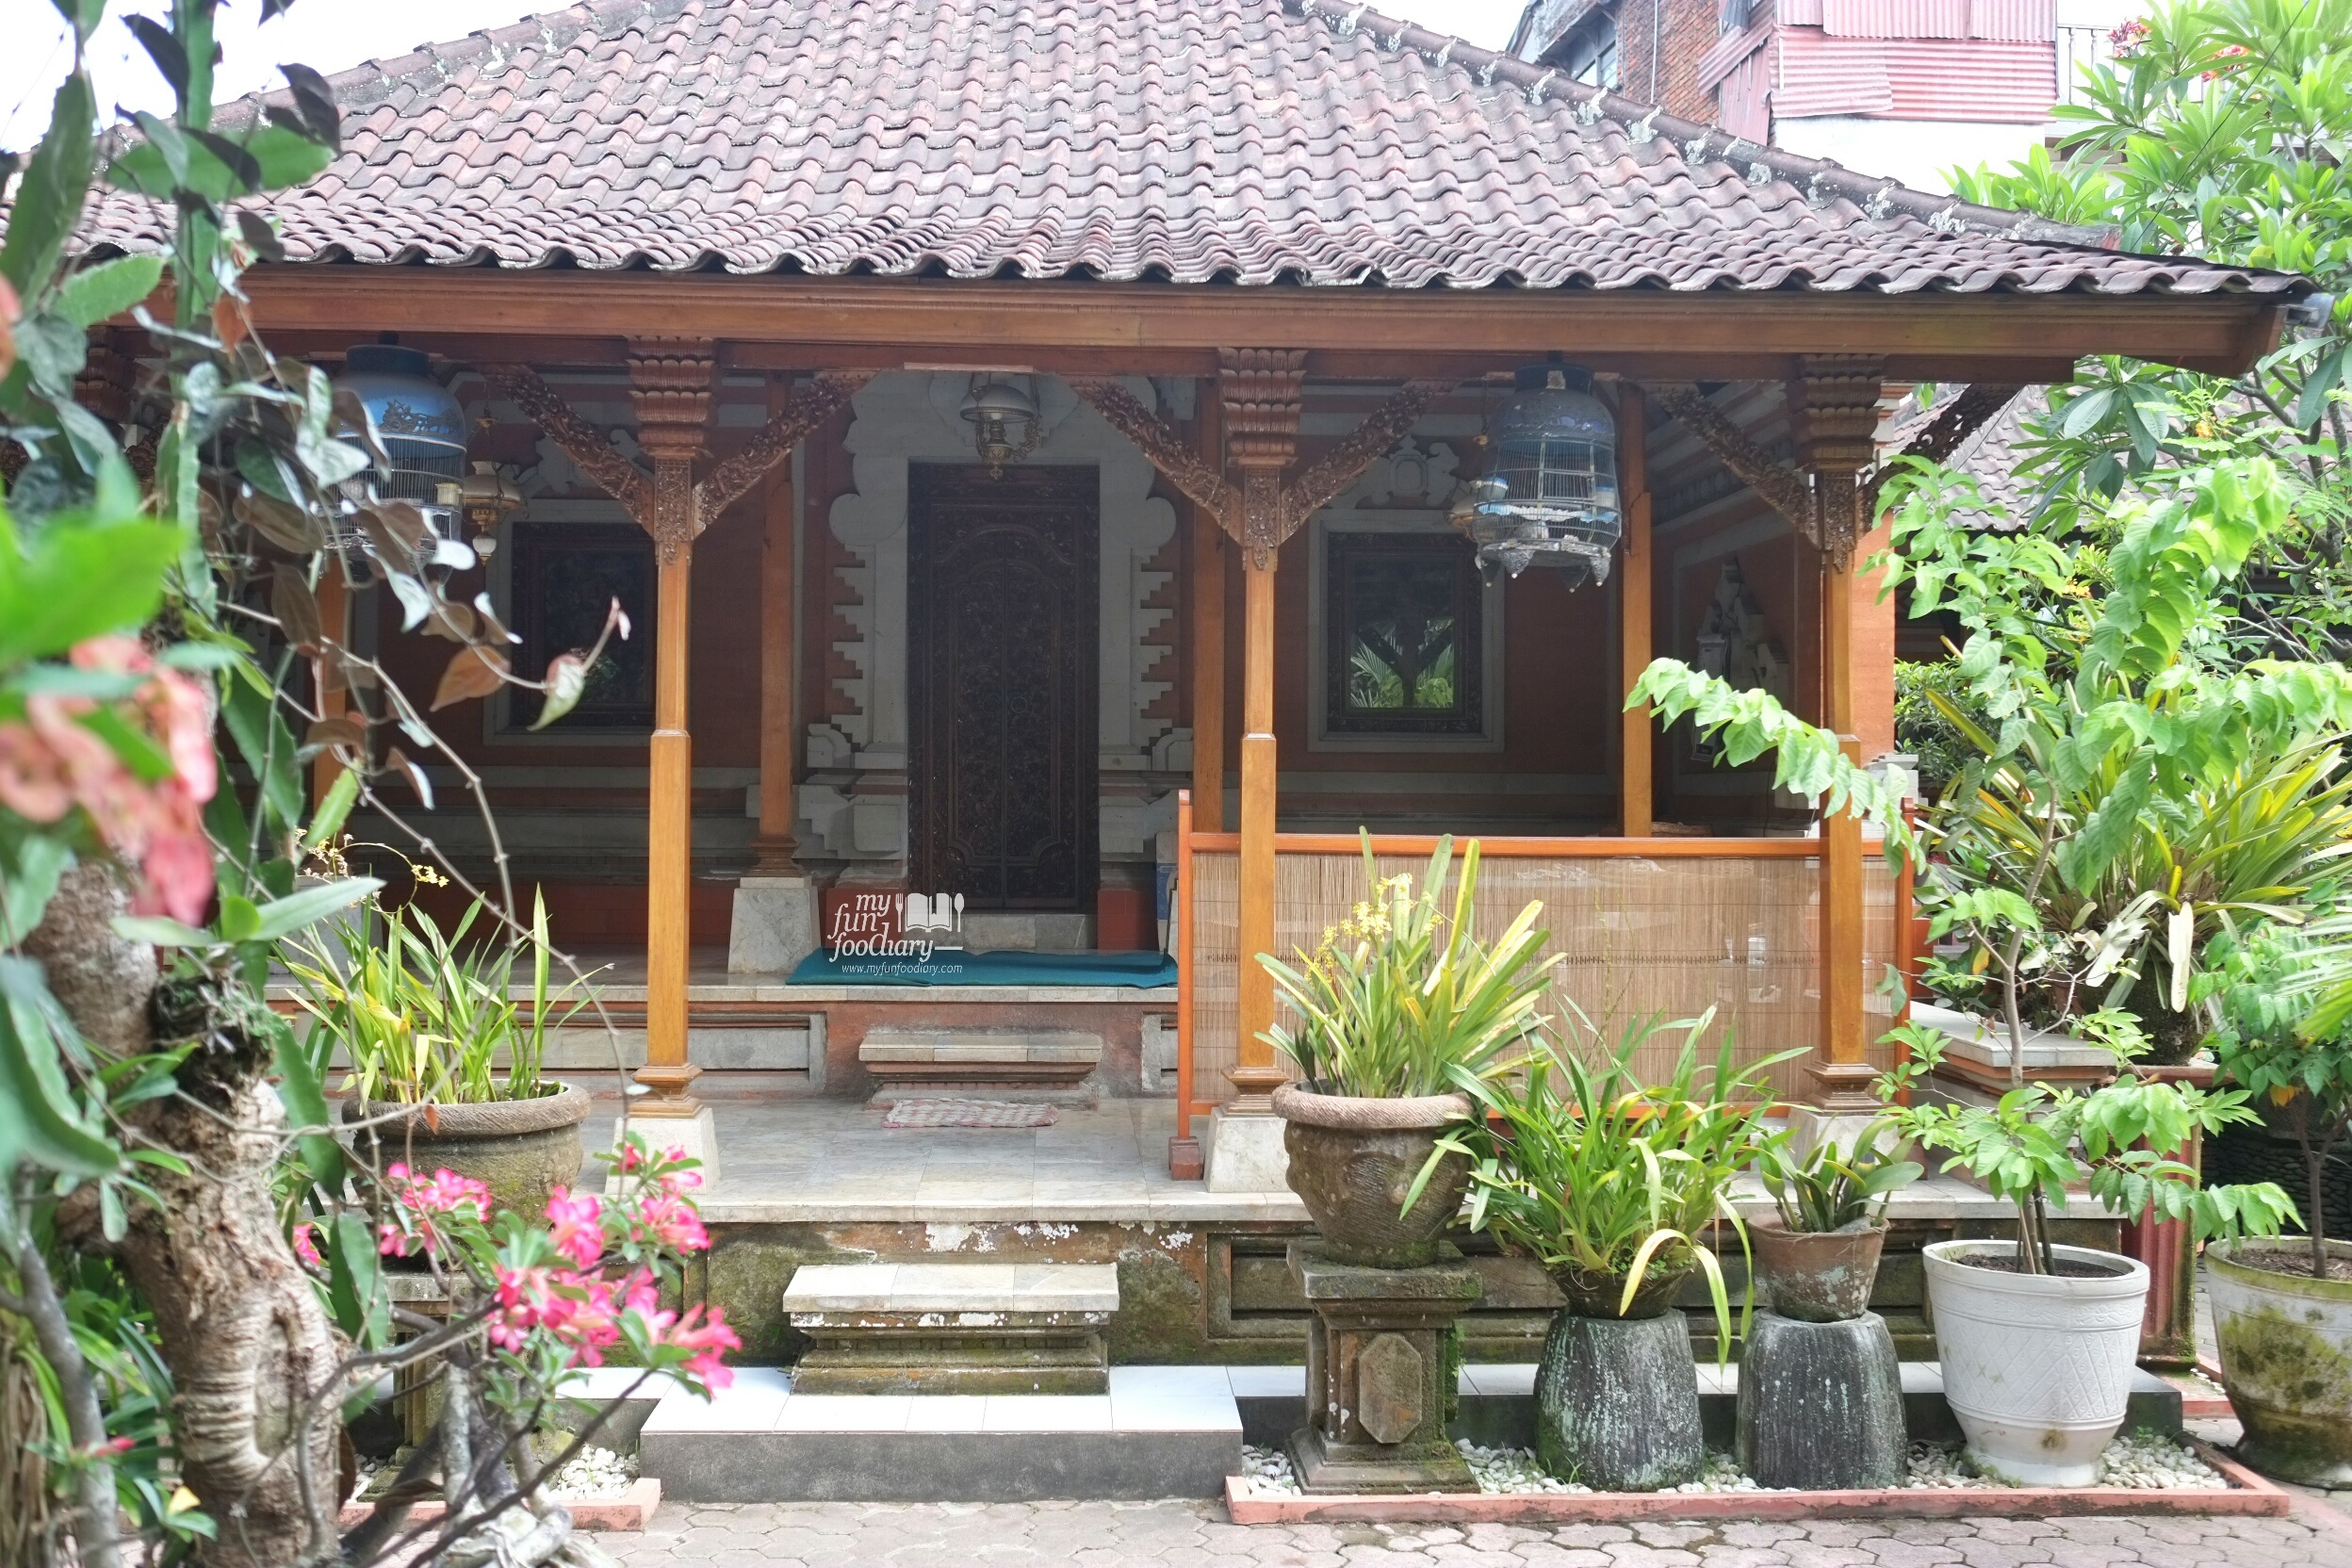 Lesehan area at Warung Teges Ubud Bali by Myfunfoodiary